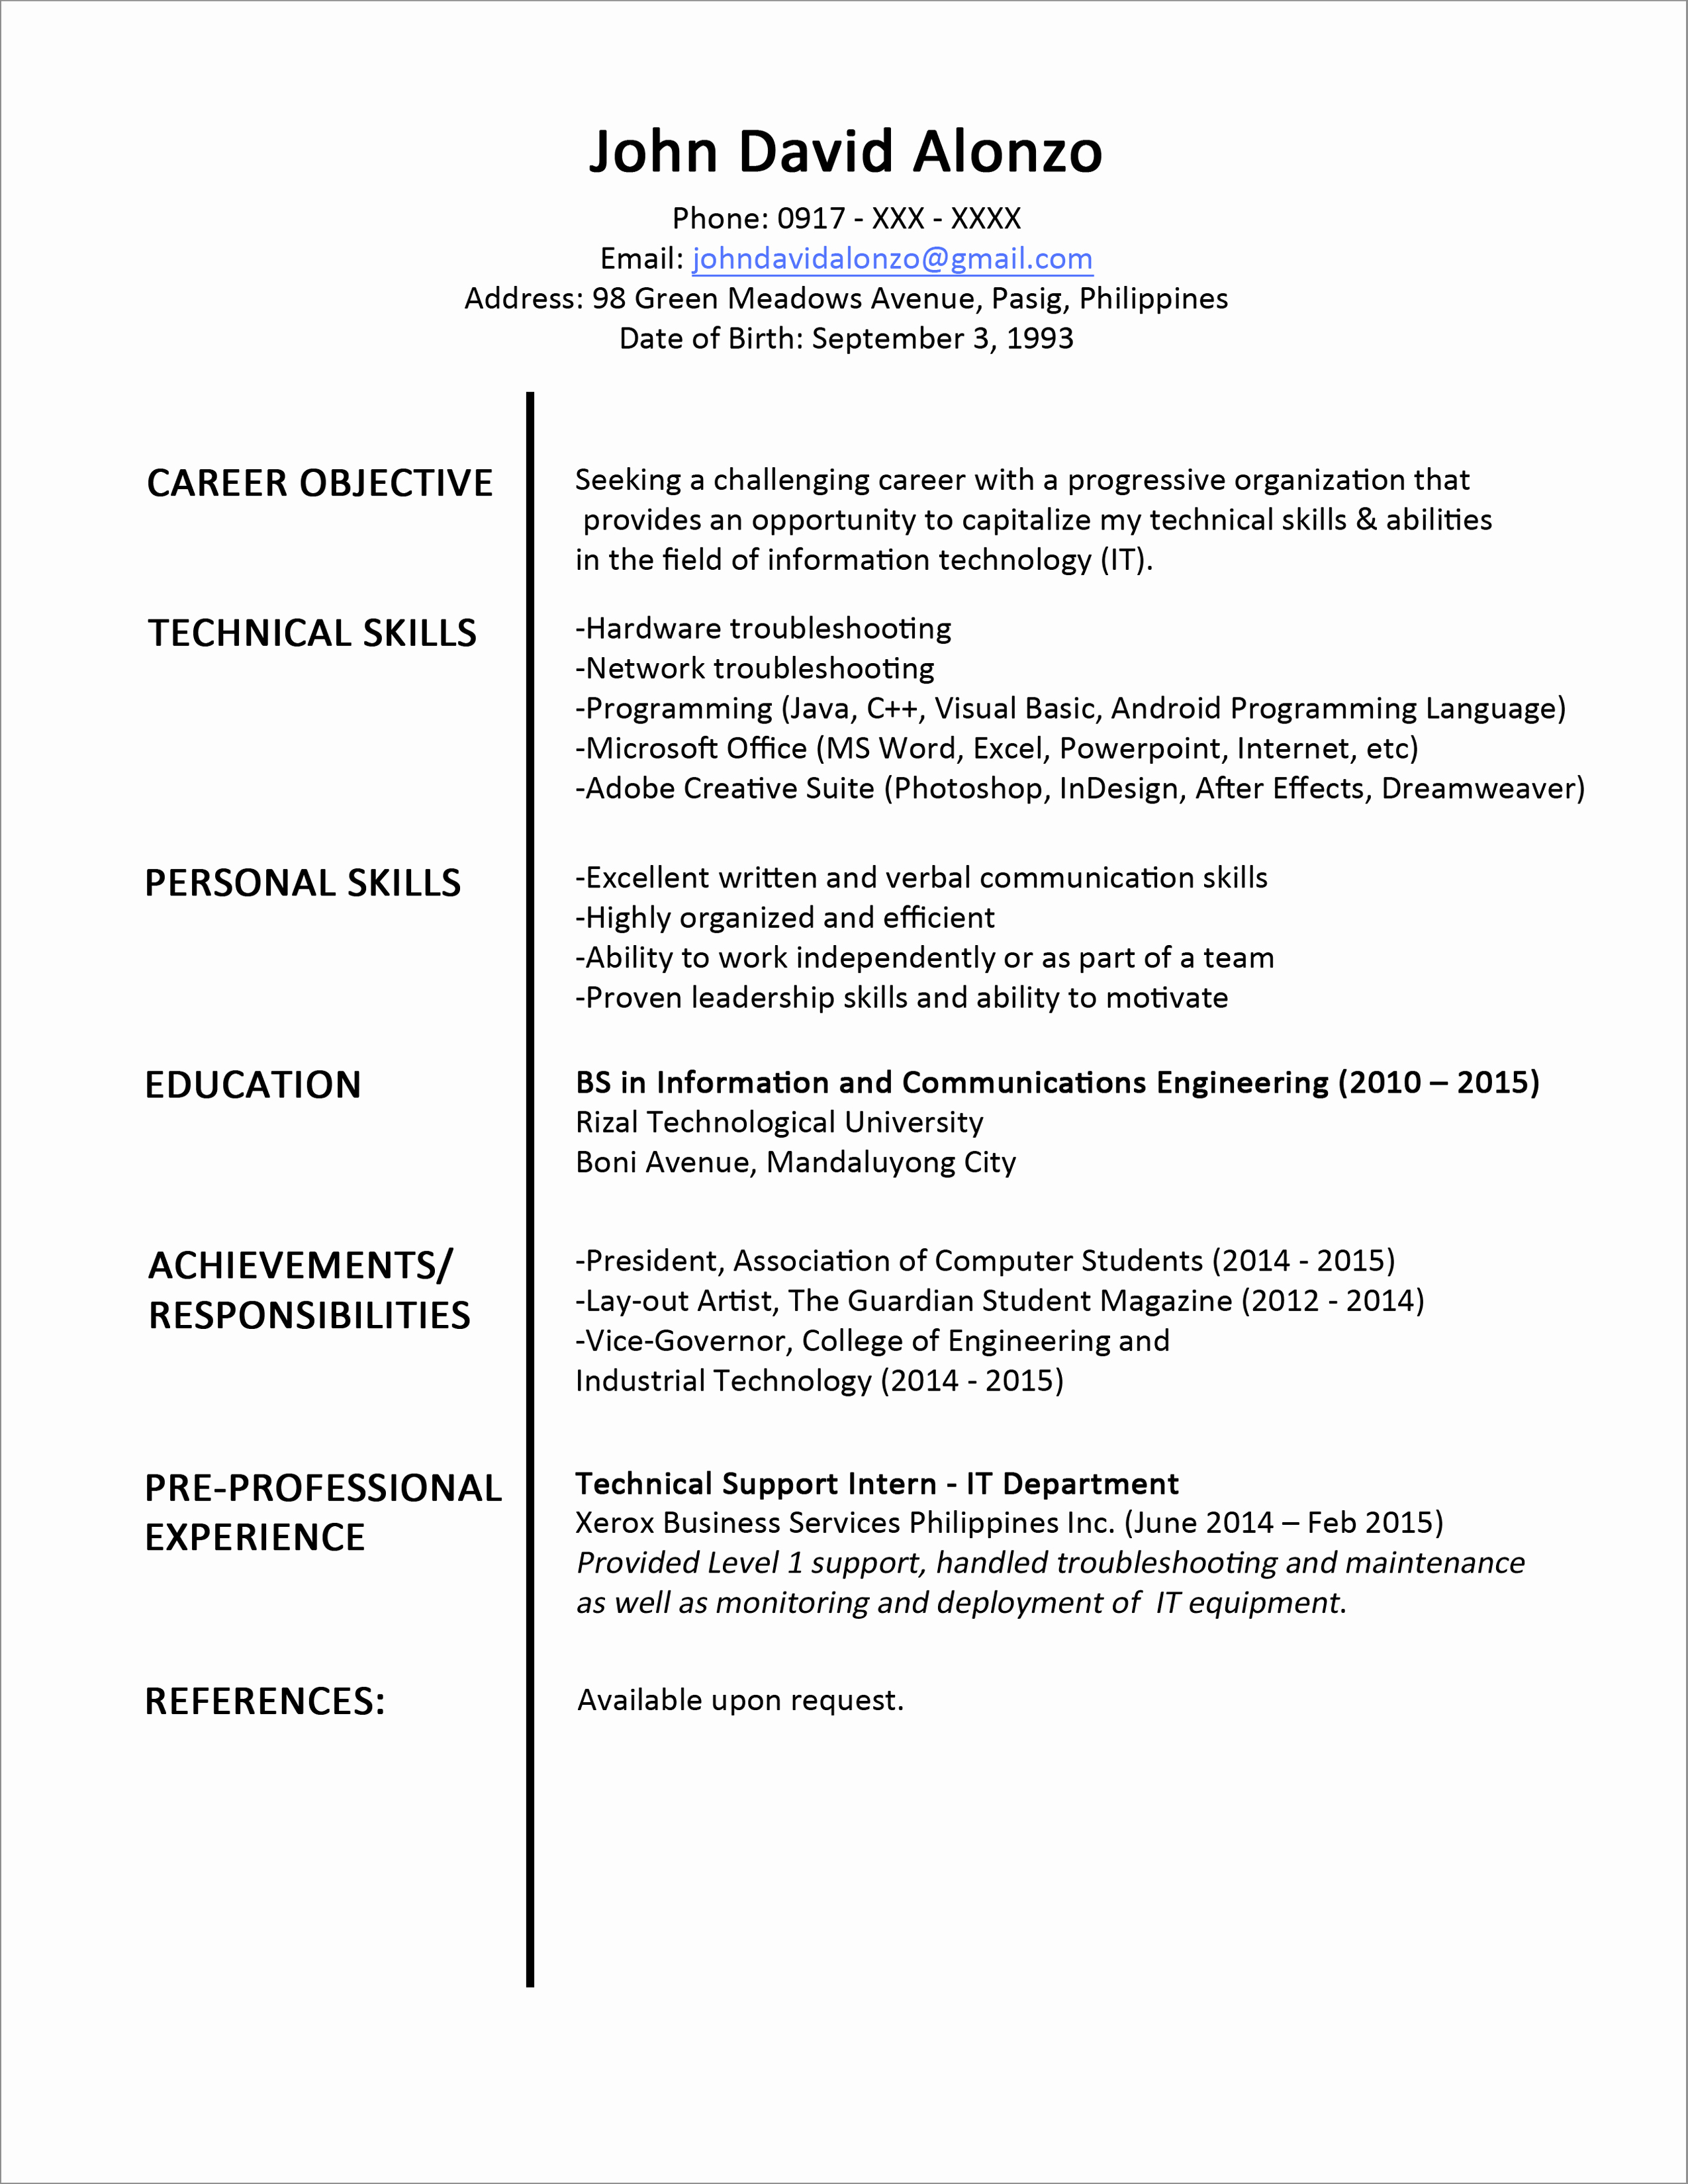 Resume after High School Awesome Sample Resume format for Fresh Graduates E Page format